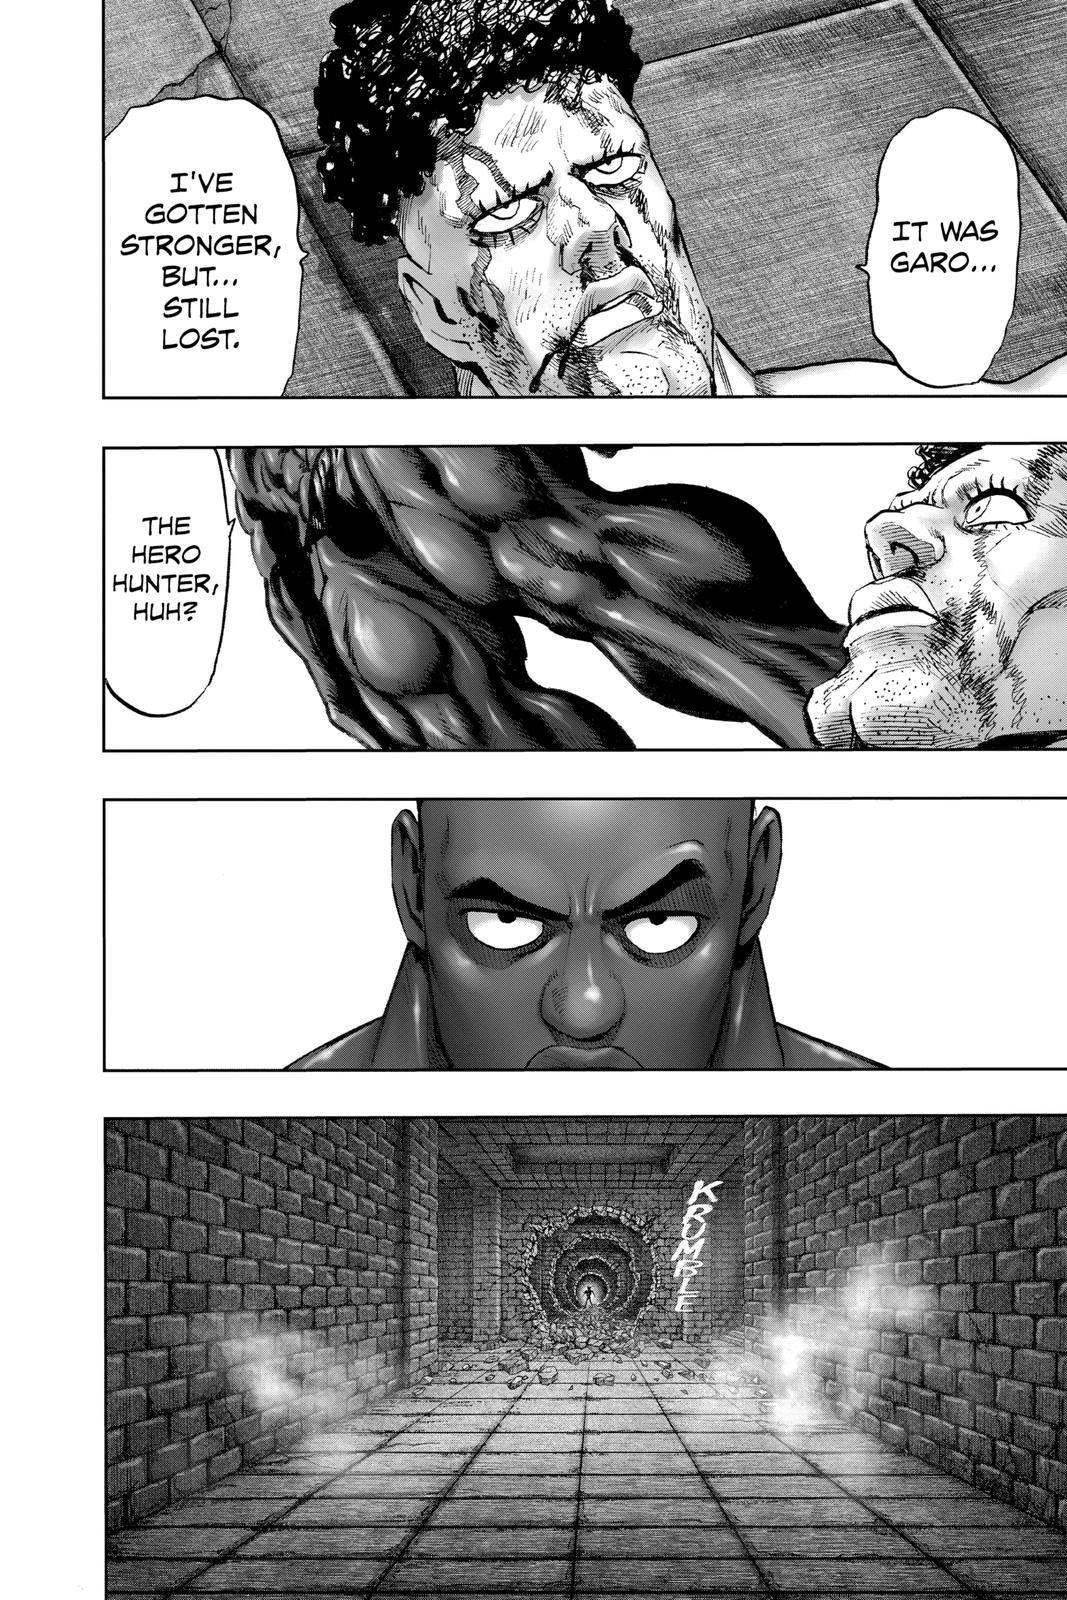 One-Punch Man, Punch 125 image 05